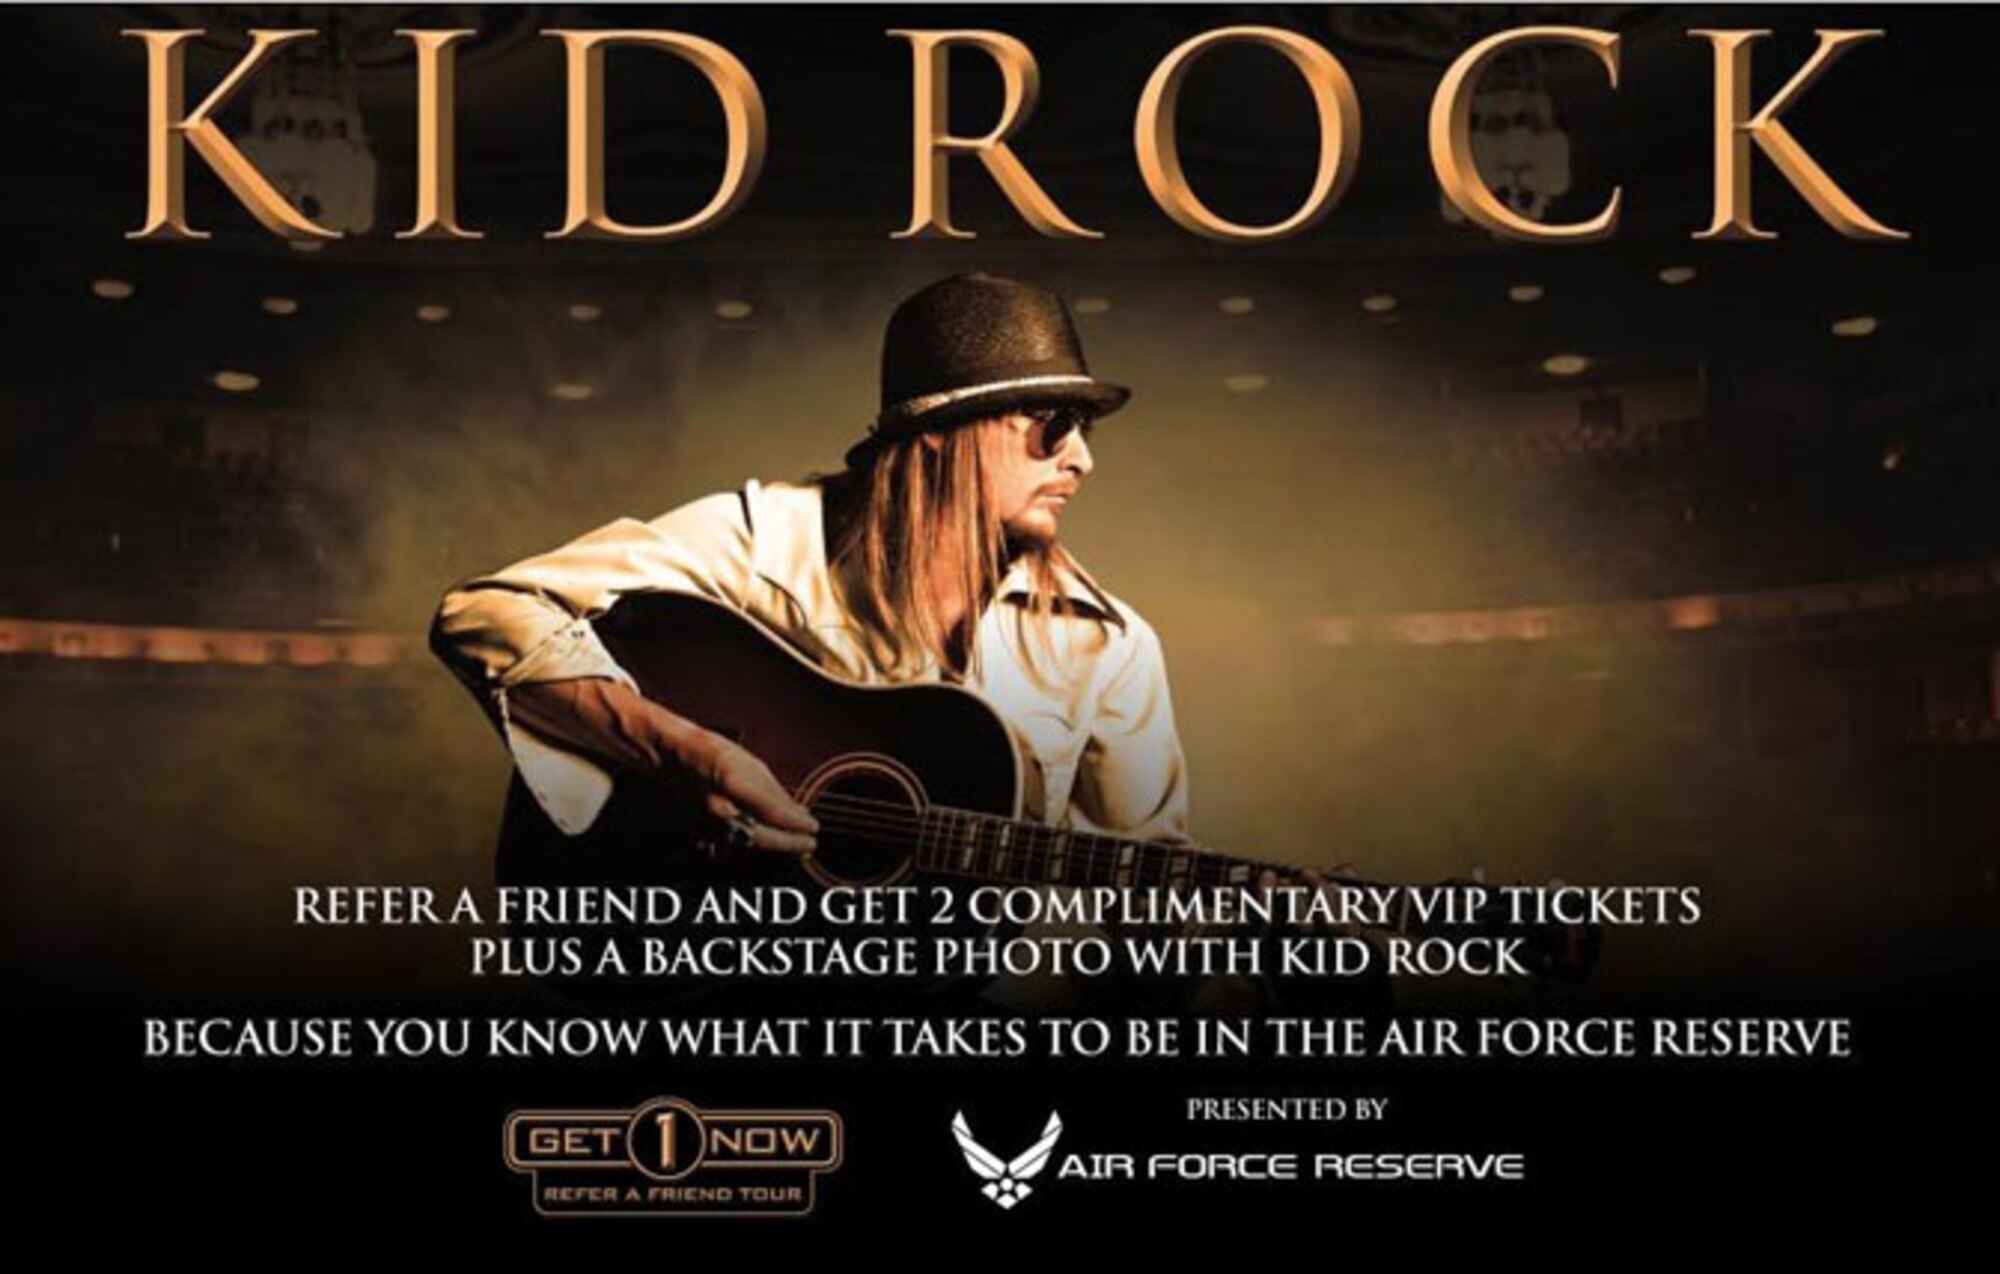 Get 1 Now "Refer a Friend Tour" featuring Kid Rock is scheduled to perform at the North Charleston Coliseum Feb. 16, 2011 at 7 p.m.